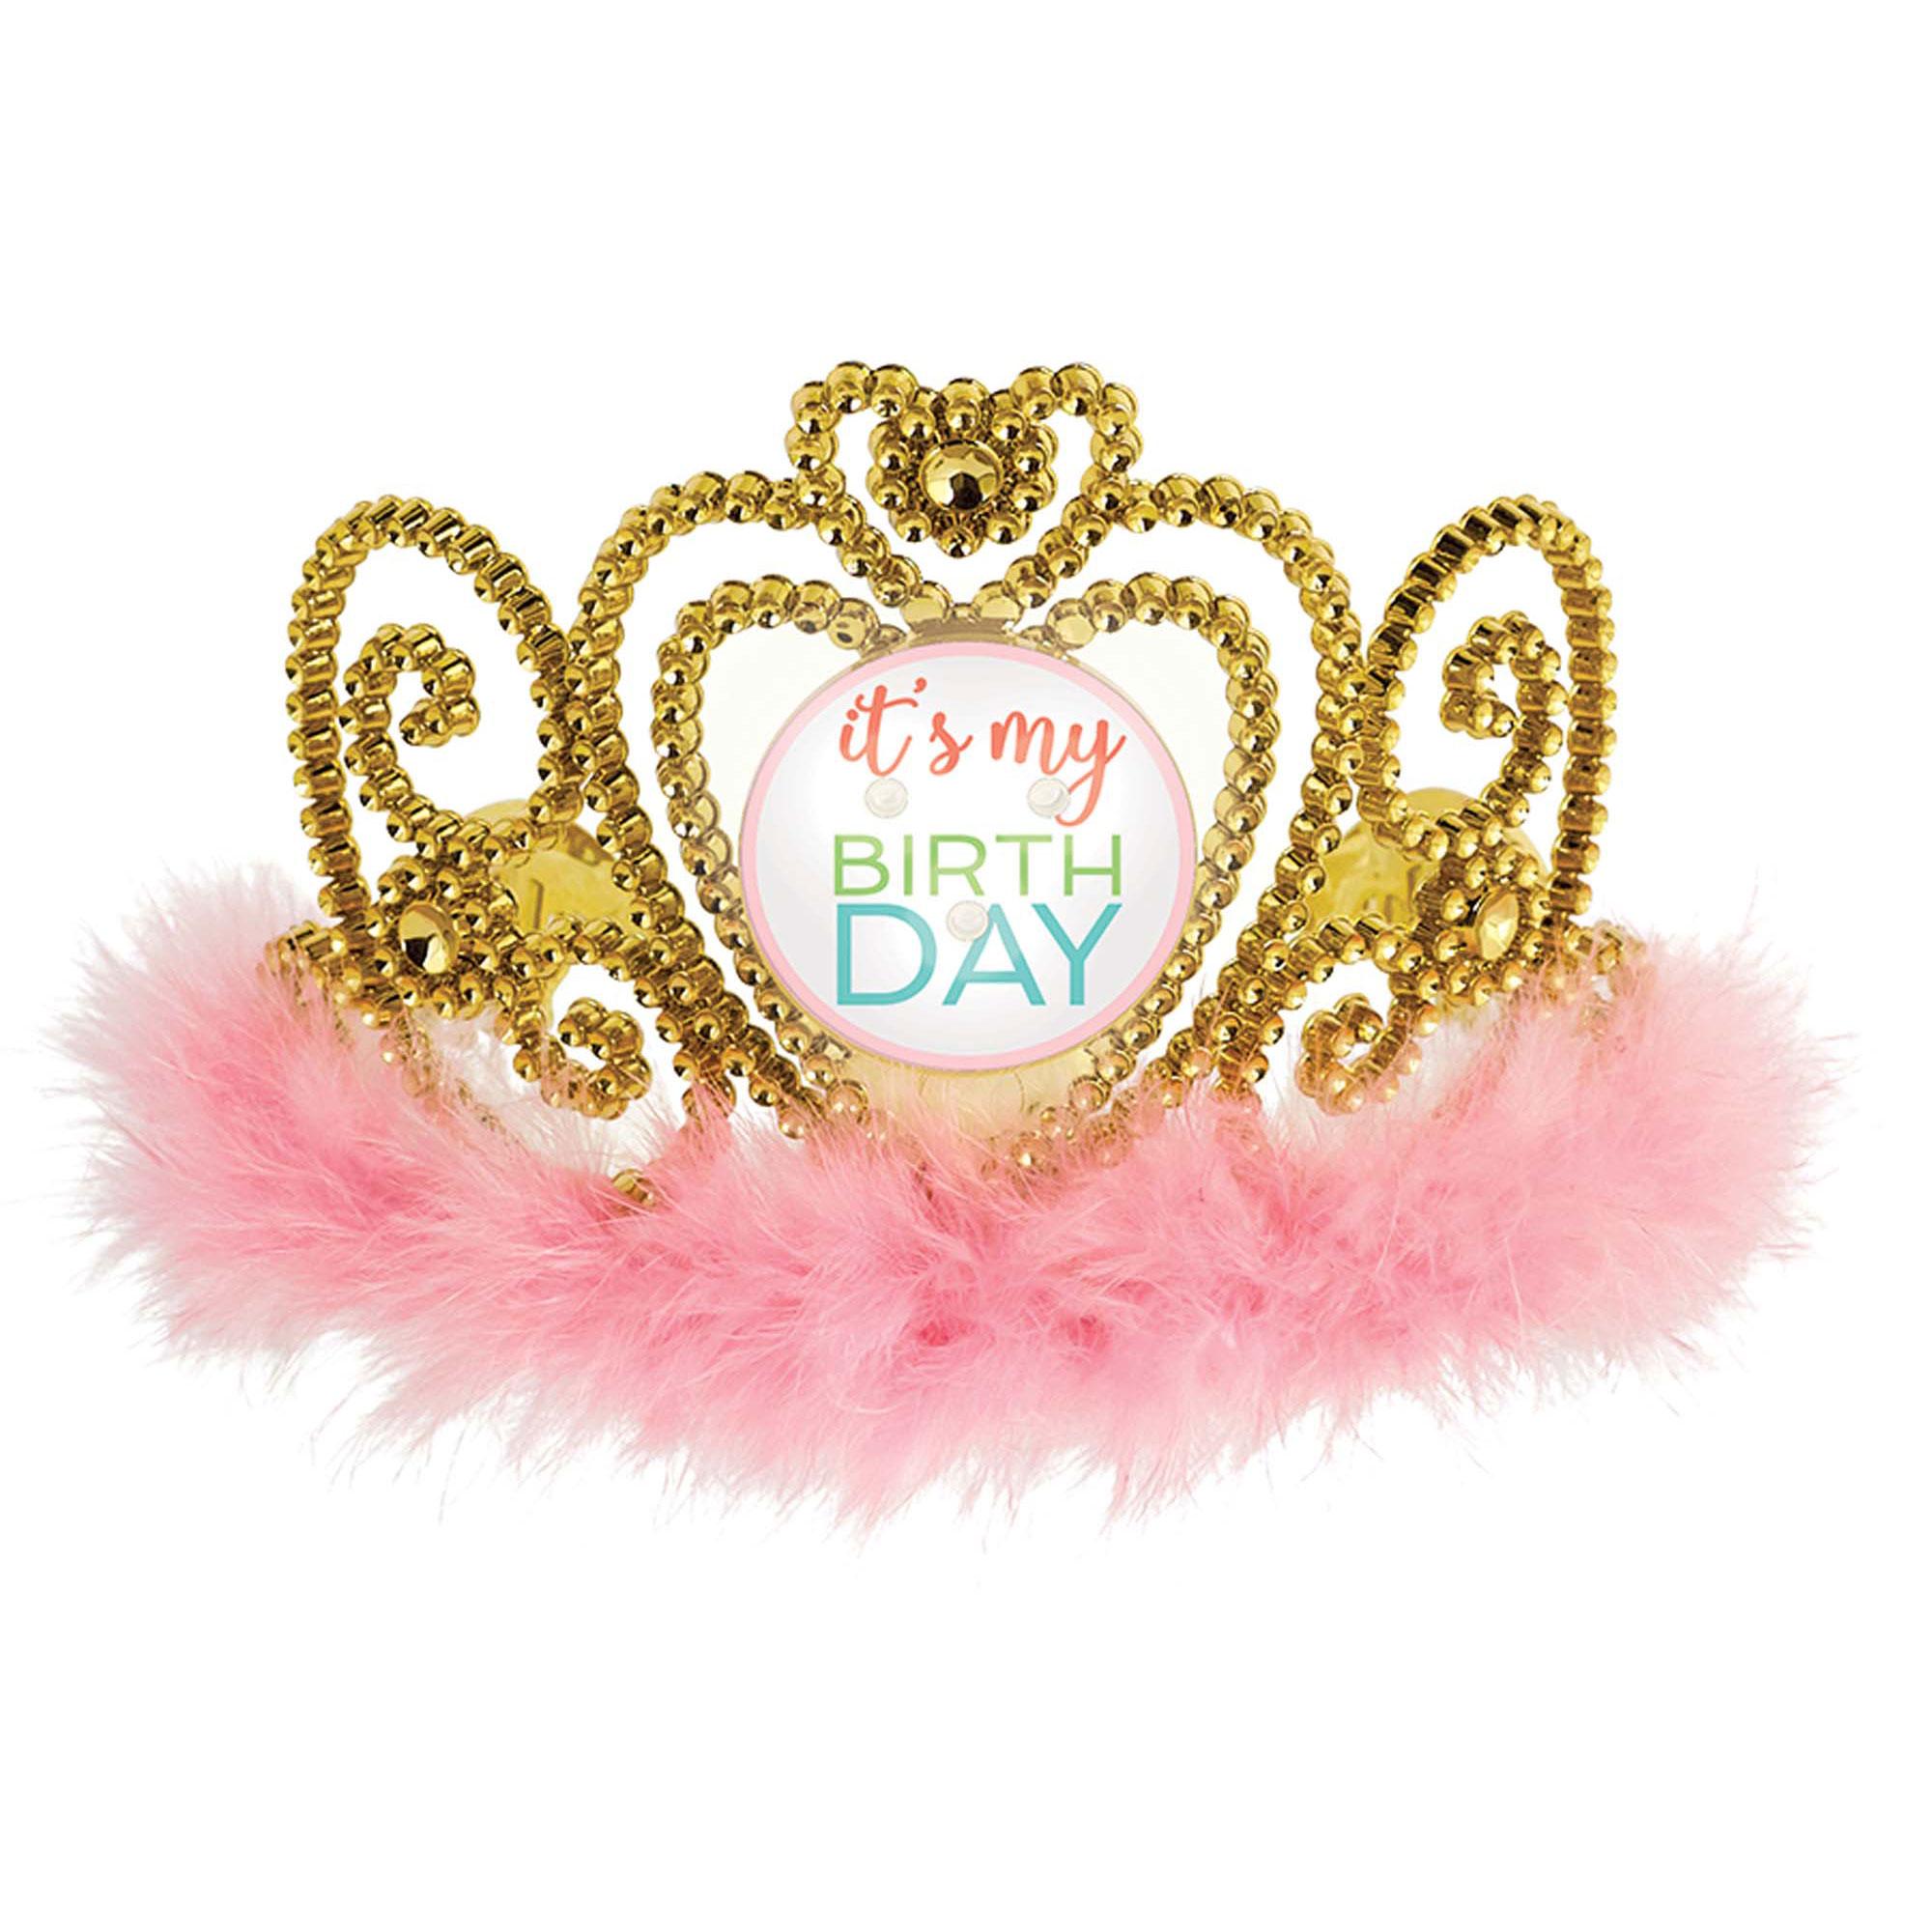 Confetti Fun Light Up Tiara With Marabou 10cm Costumes & Apparel - Party Centre